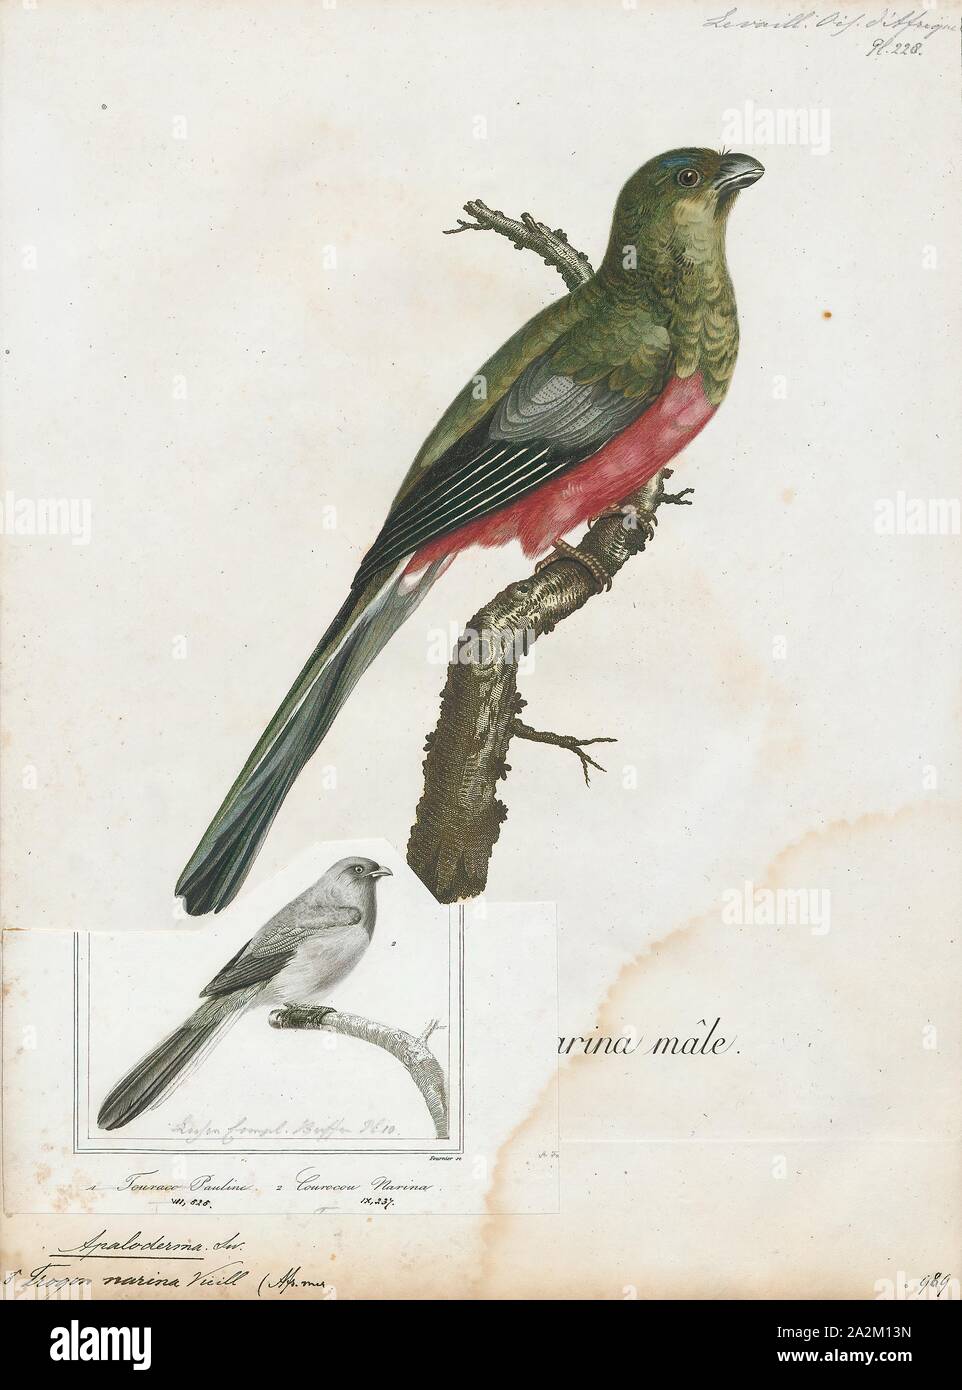 Apaloderma narina, Print, The Narina trogon (Apaloderma narina) is a largely green and red, medium-sized (32–34 cm long), bird of the family Trogonidae. It is native to forests and woodlands of the Afrotropics. Though it is the most widespread and catholic in habitat choice of the three Apaloderma species, their numbers are locally depleted due to deforestation. Some populations are sedentary while others undertake regular movements. The species name commemorates Narina, mistress of French ornithologist François Levaillant, whose name he derived from a Khoikhoi word for 'flower Stock Photo